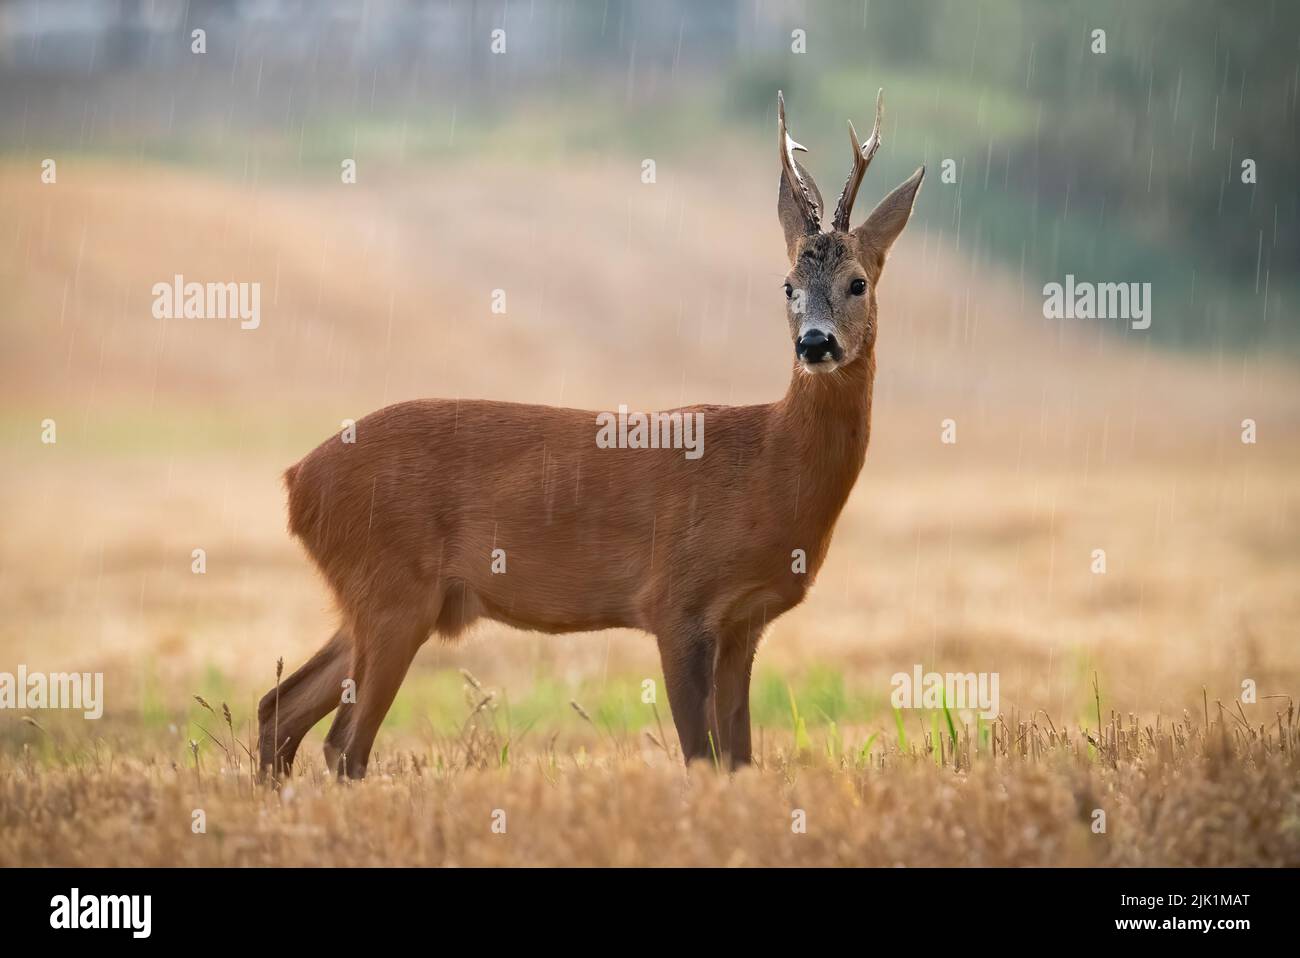 Roe deer standing on stubble during raining in summer Stock Photo